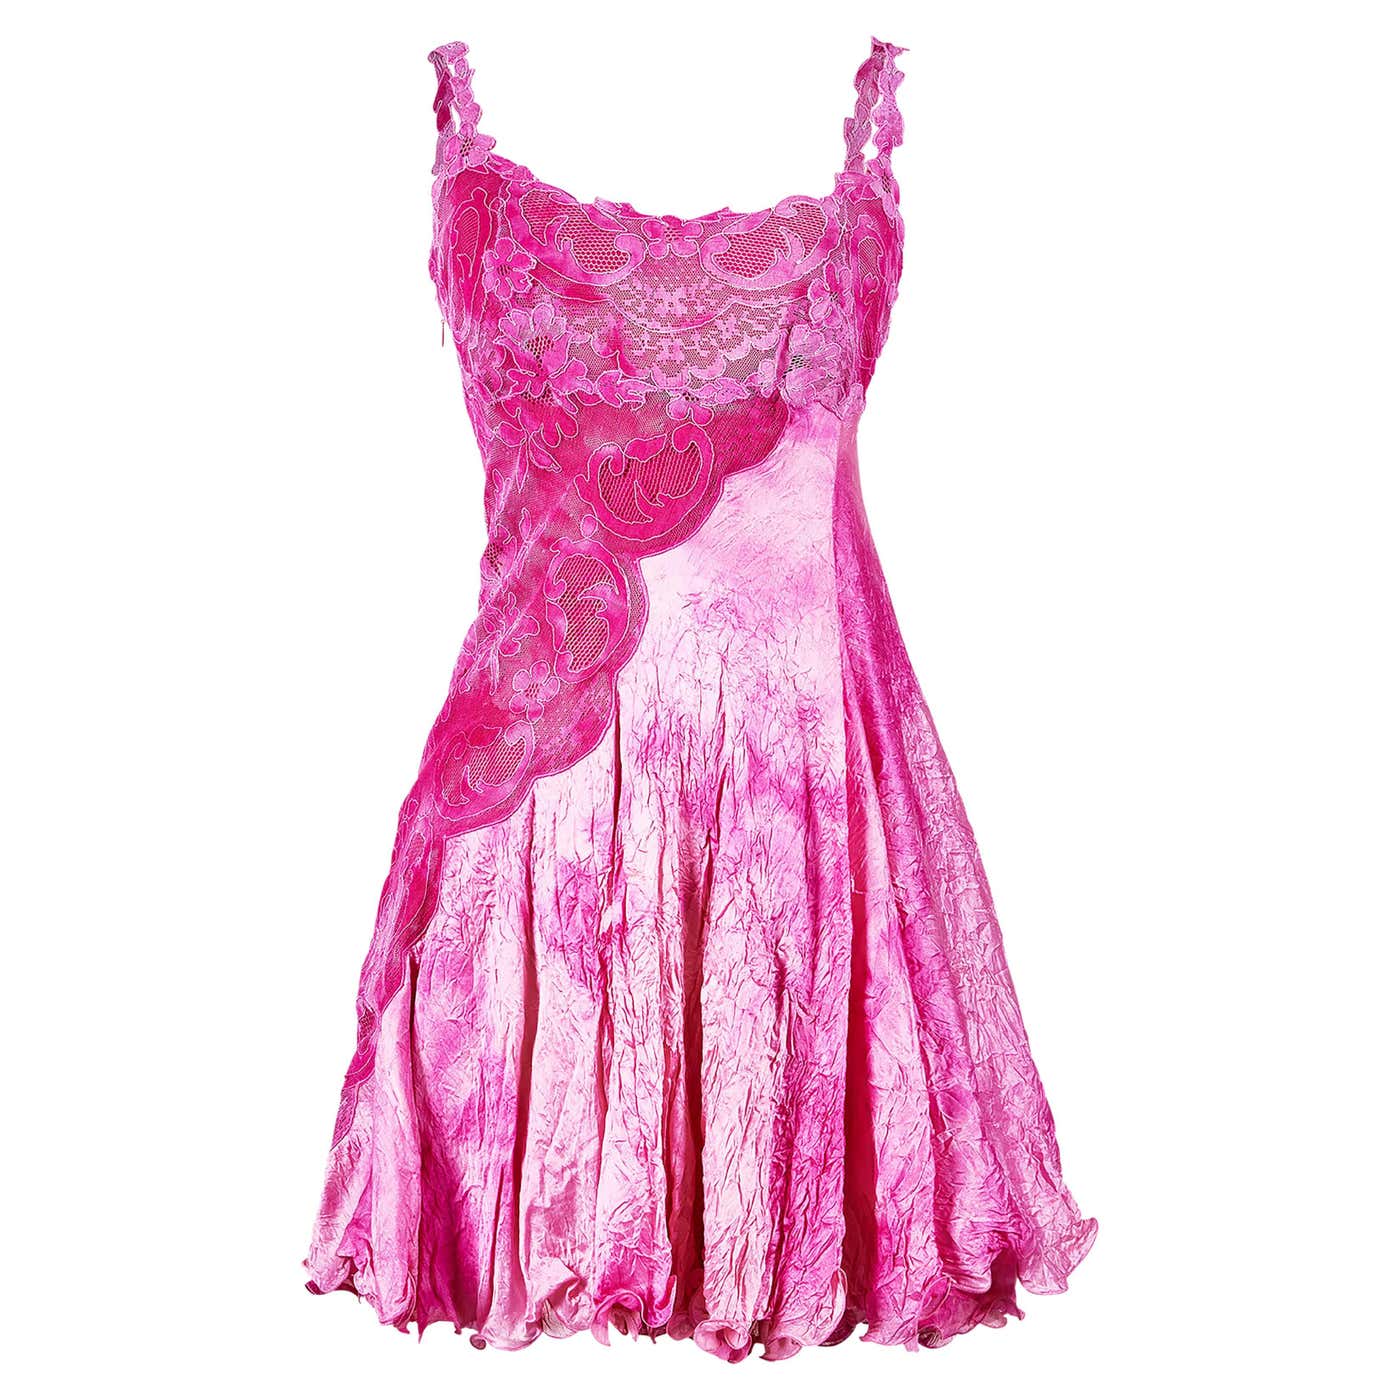 S/S 1994 Gianni Versace Pink Crinkle Mini Dress For Sale at 1stDibs